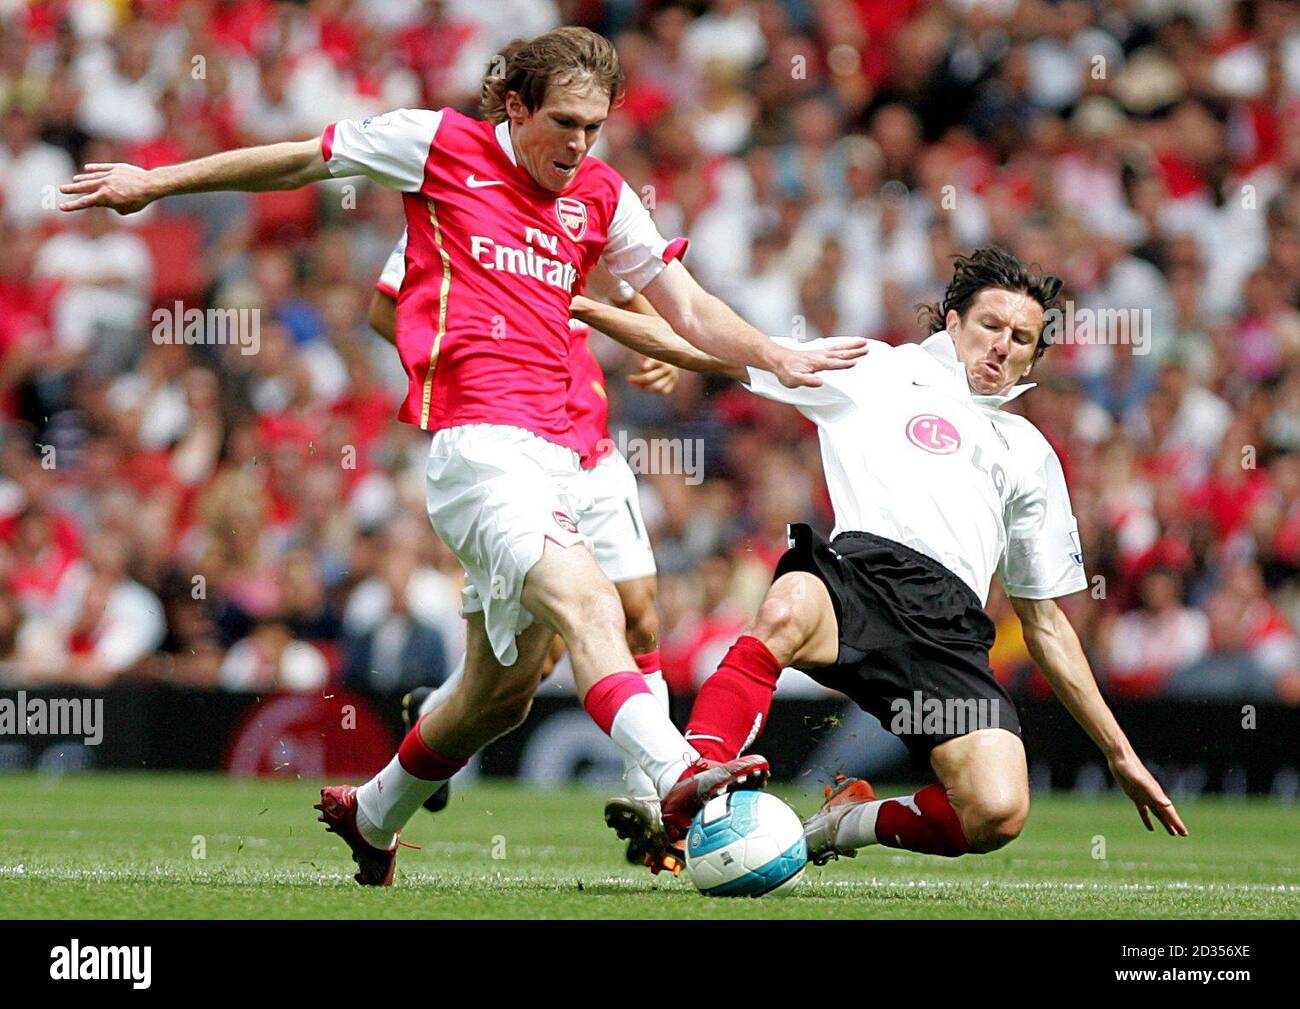 Fulham's Alexey Smertin (r) and Arsenal's Alexander Hleb (l)  battle for the ball Stock Photo